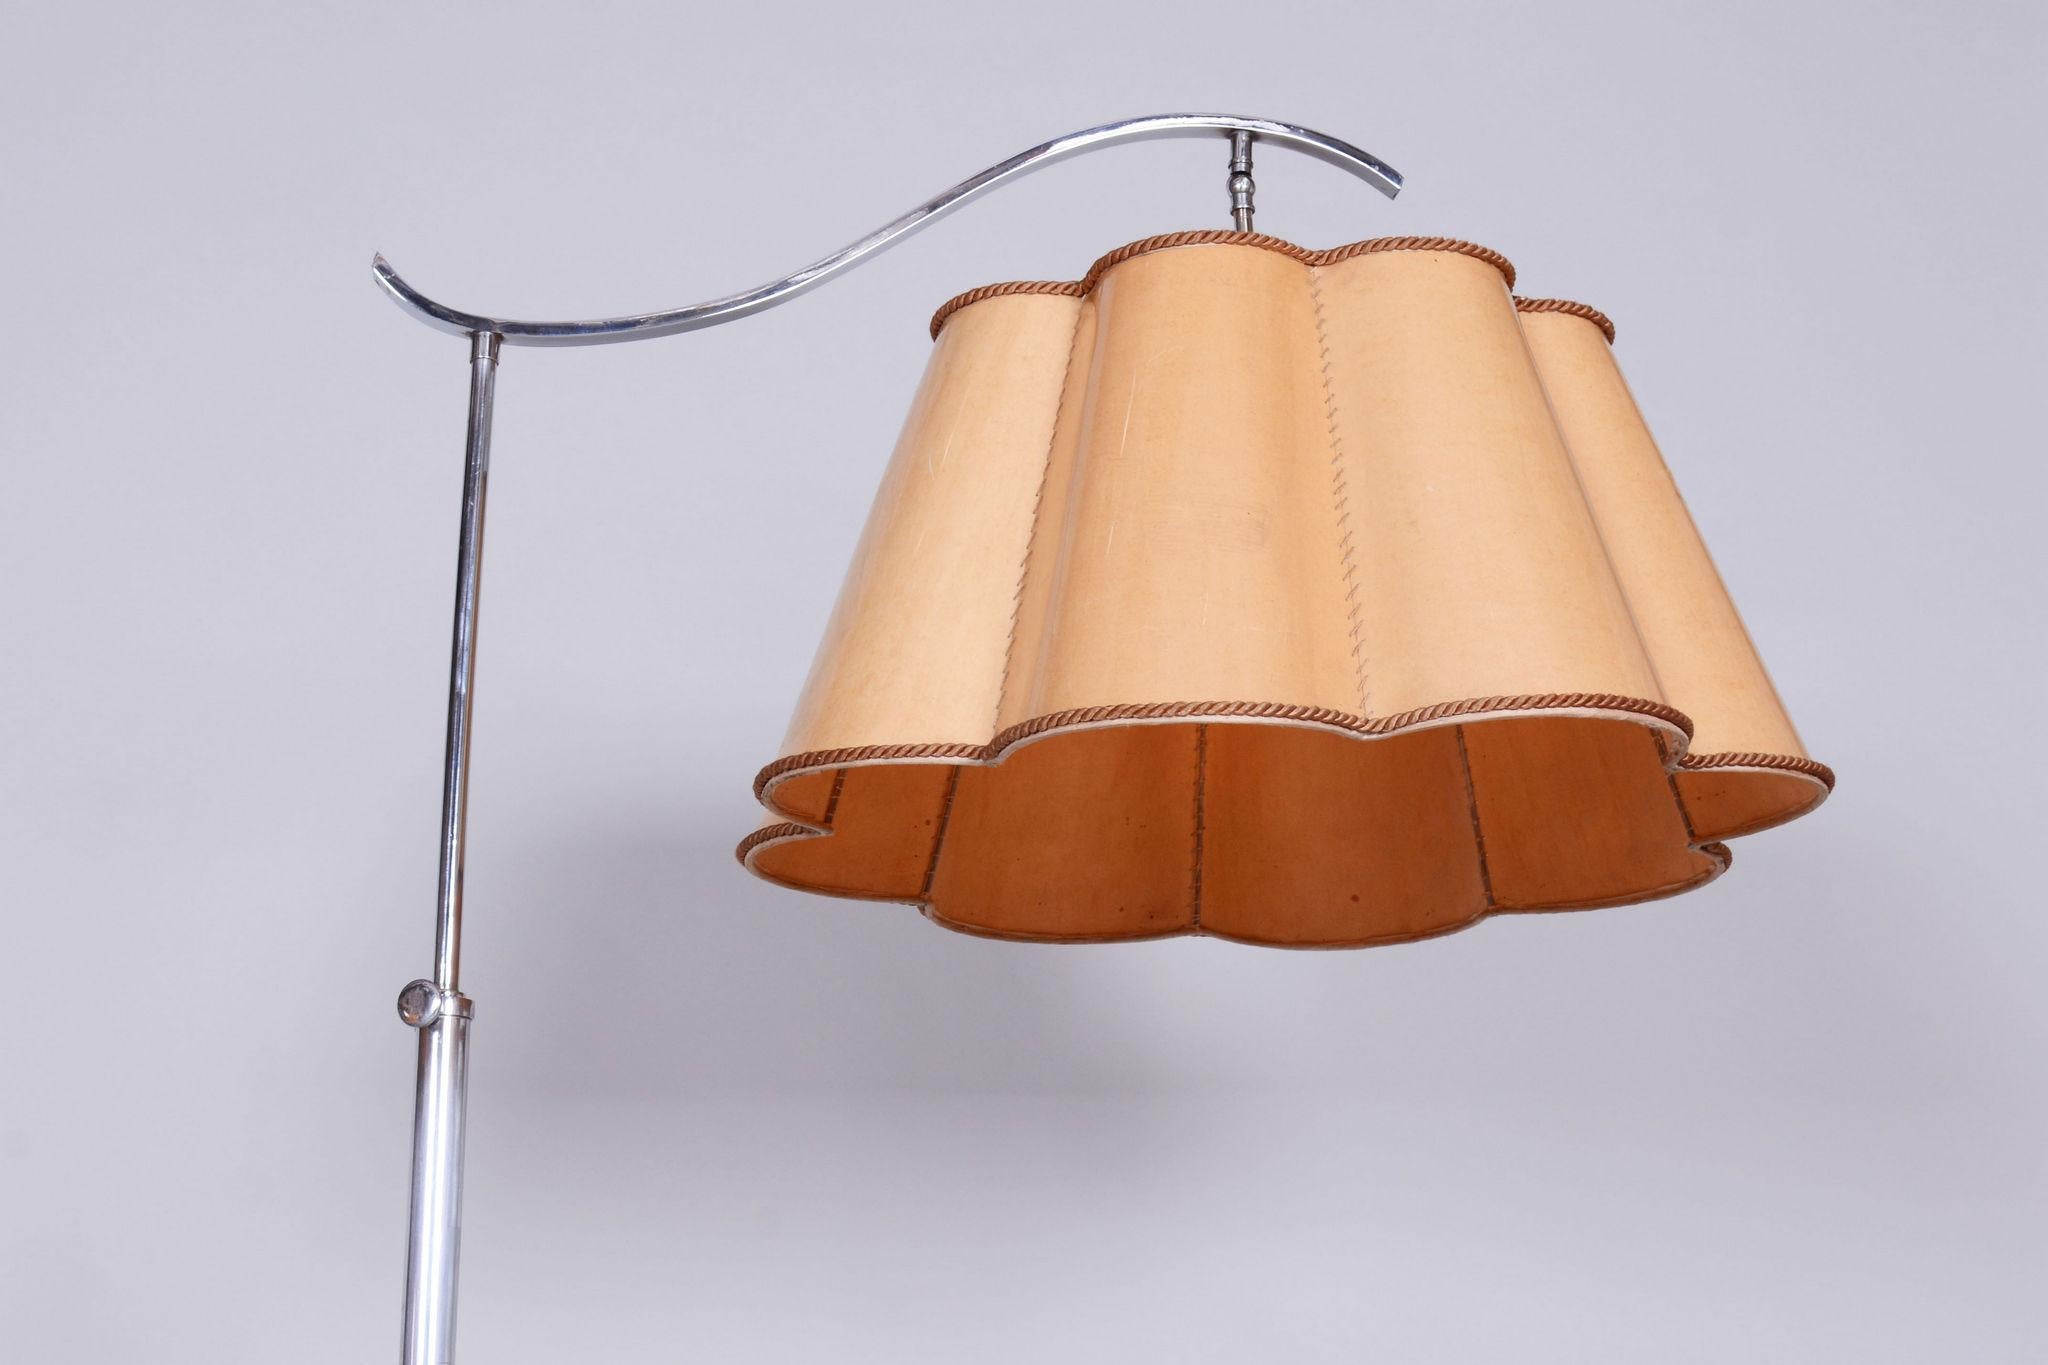 20th Century Czech Bauhaus Chrome Floor Lamp with Parchment Shade, 1920s For Sale 3